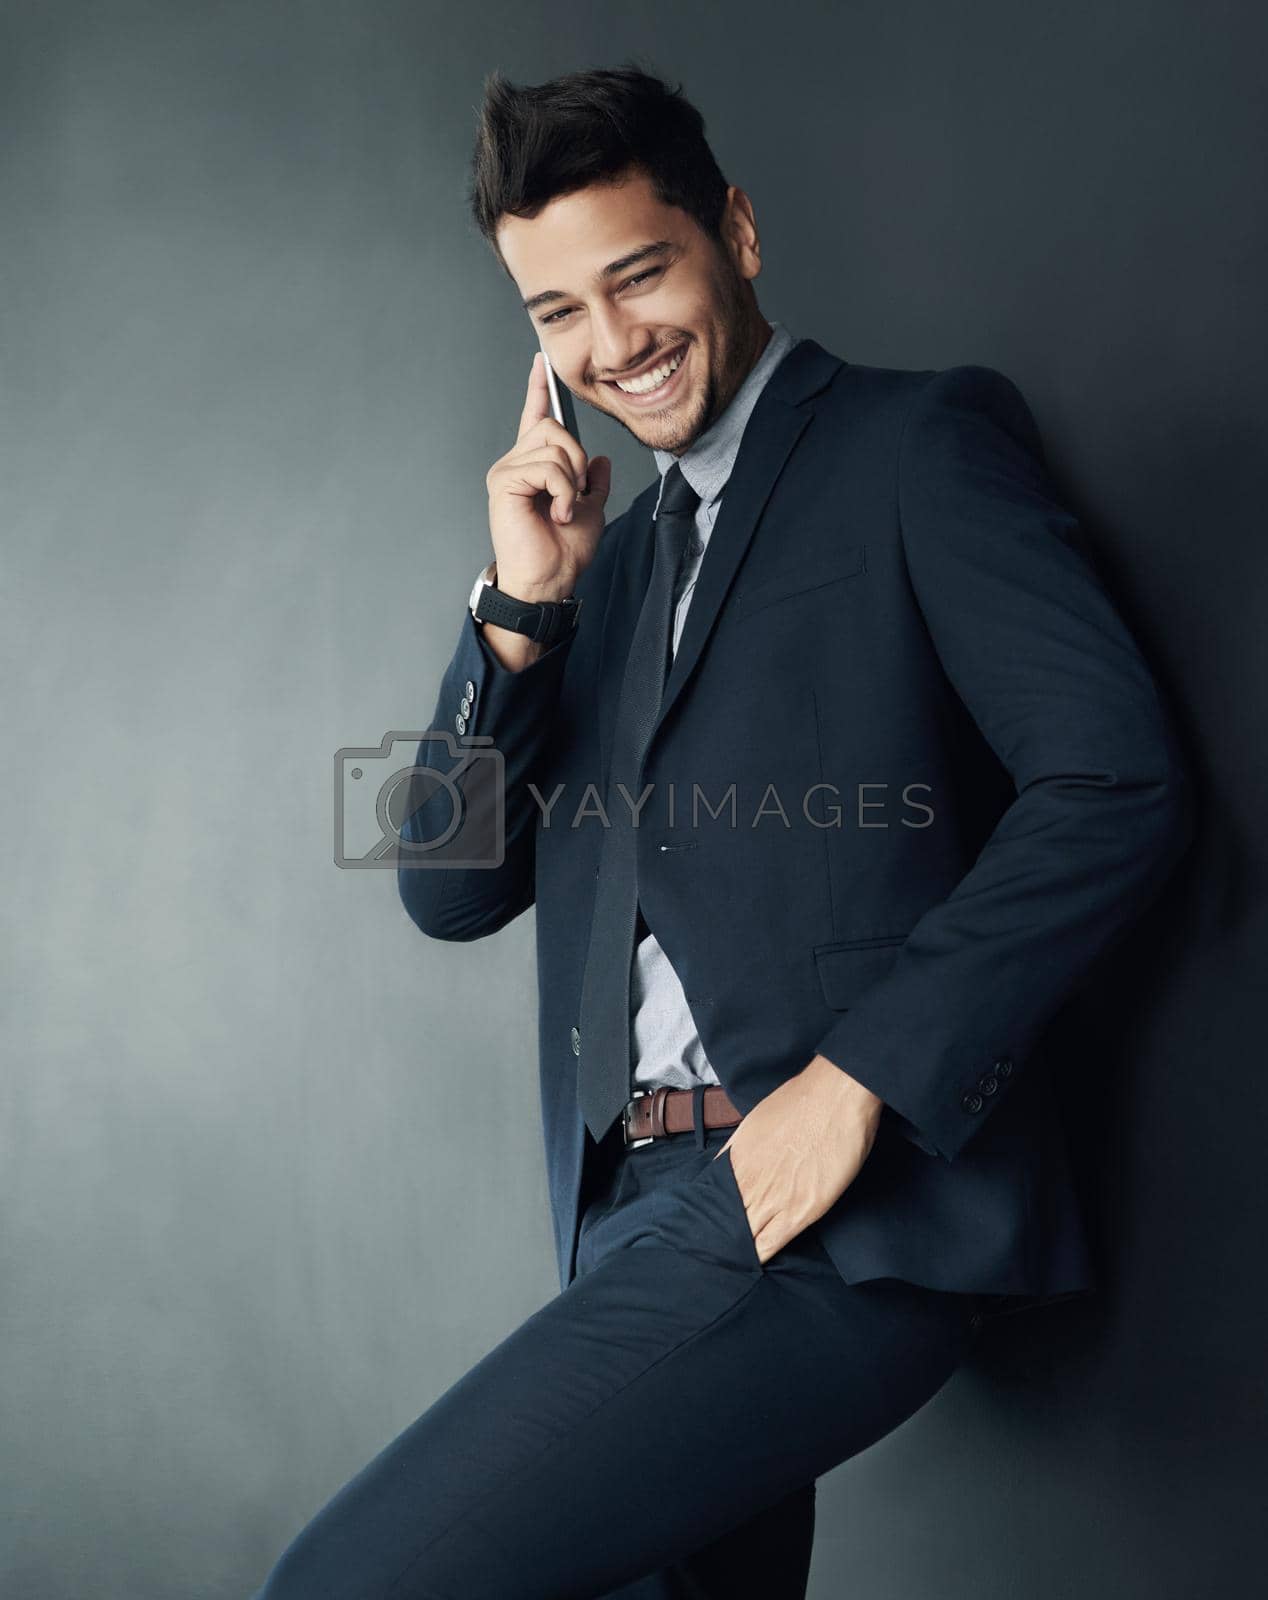 Studio shot of a young businessman talking on a cellphone against a gray background.